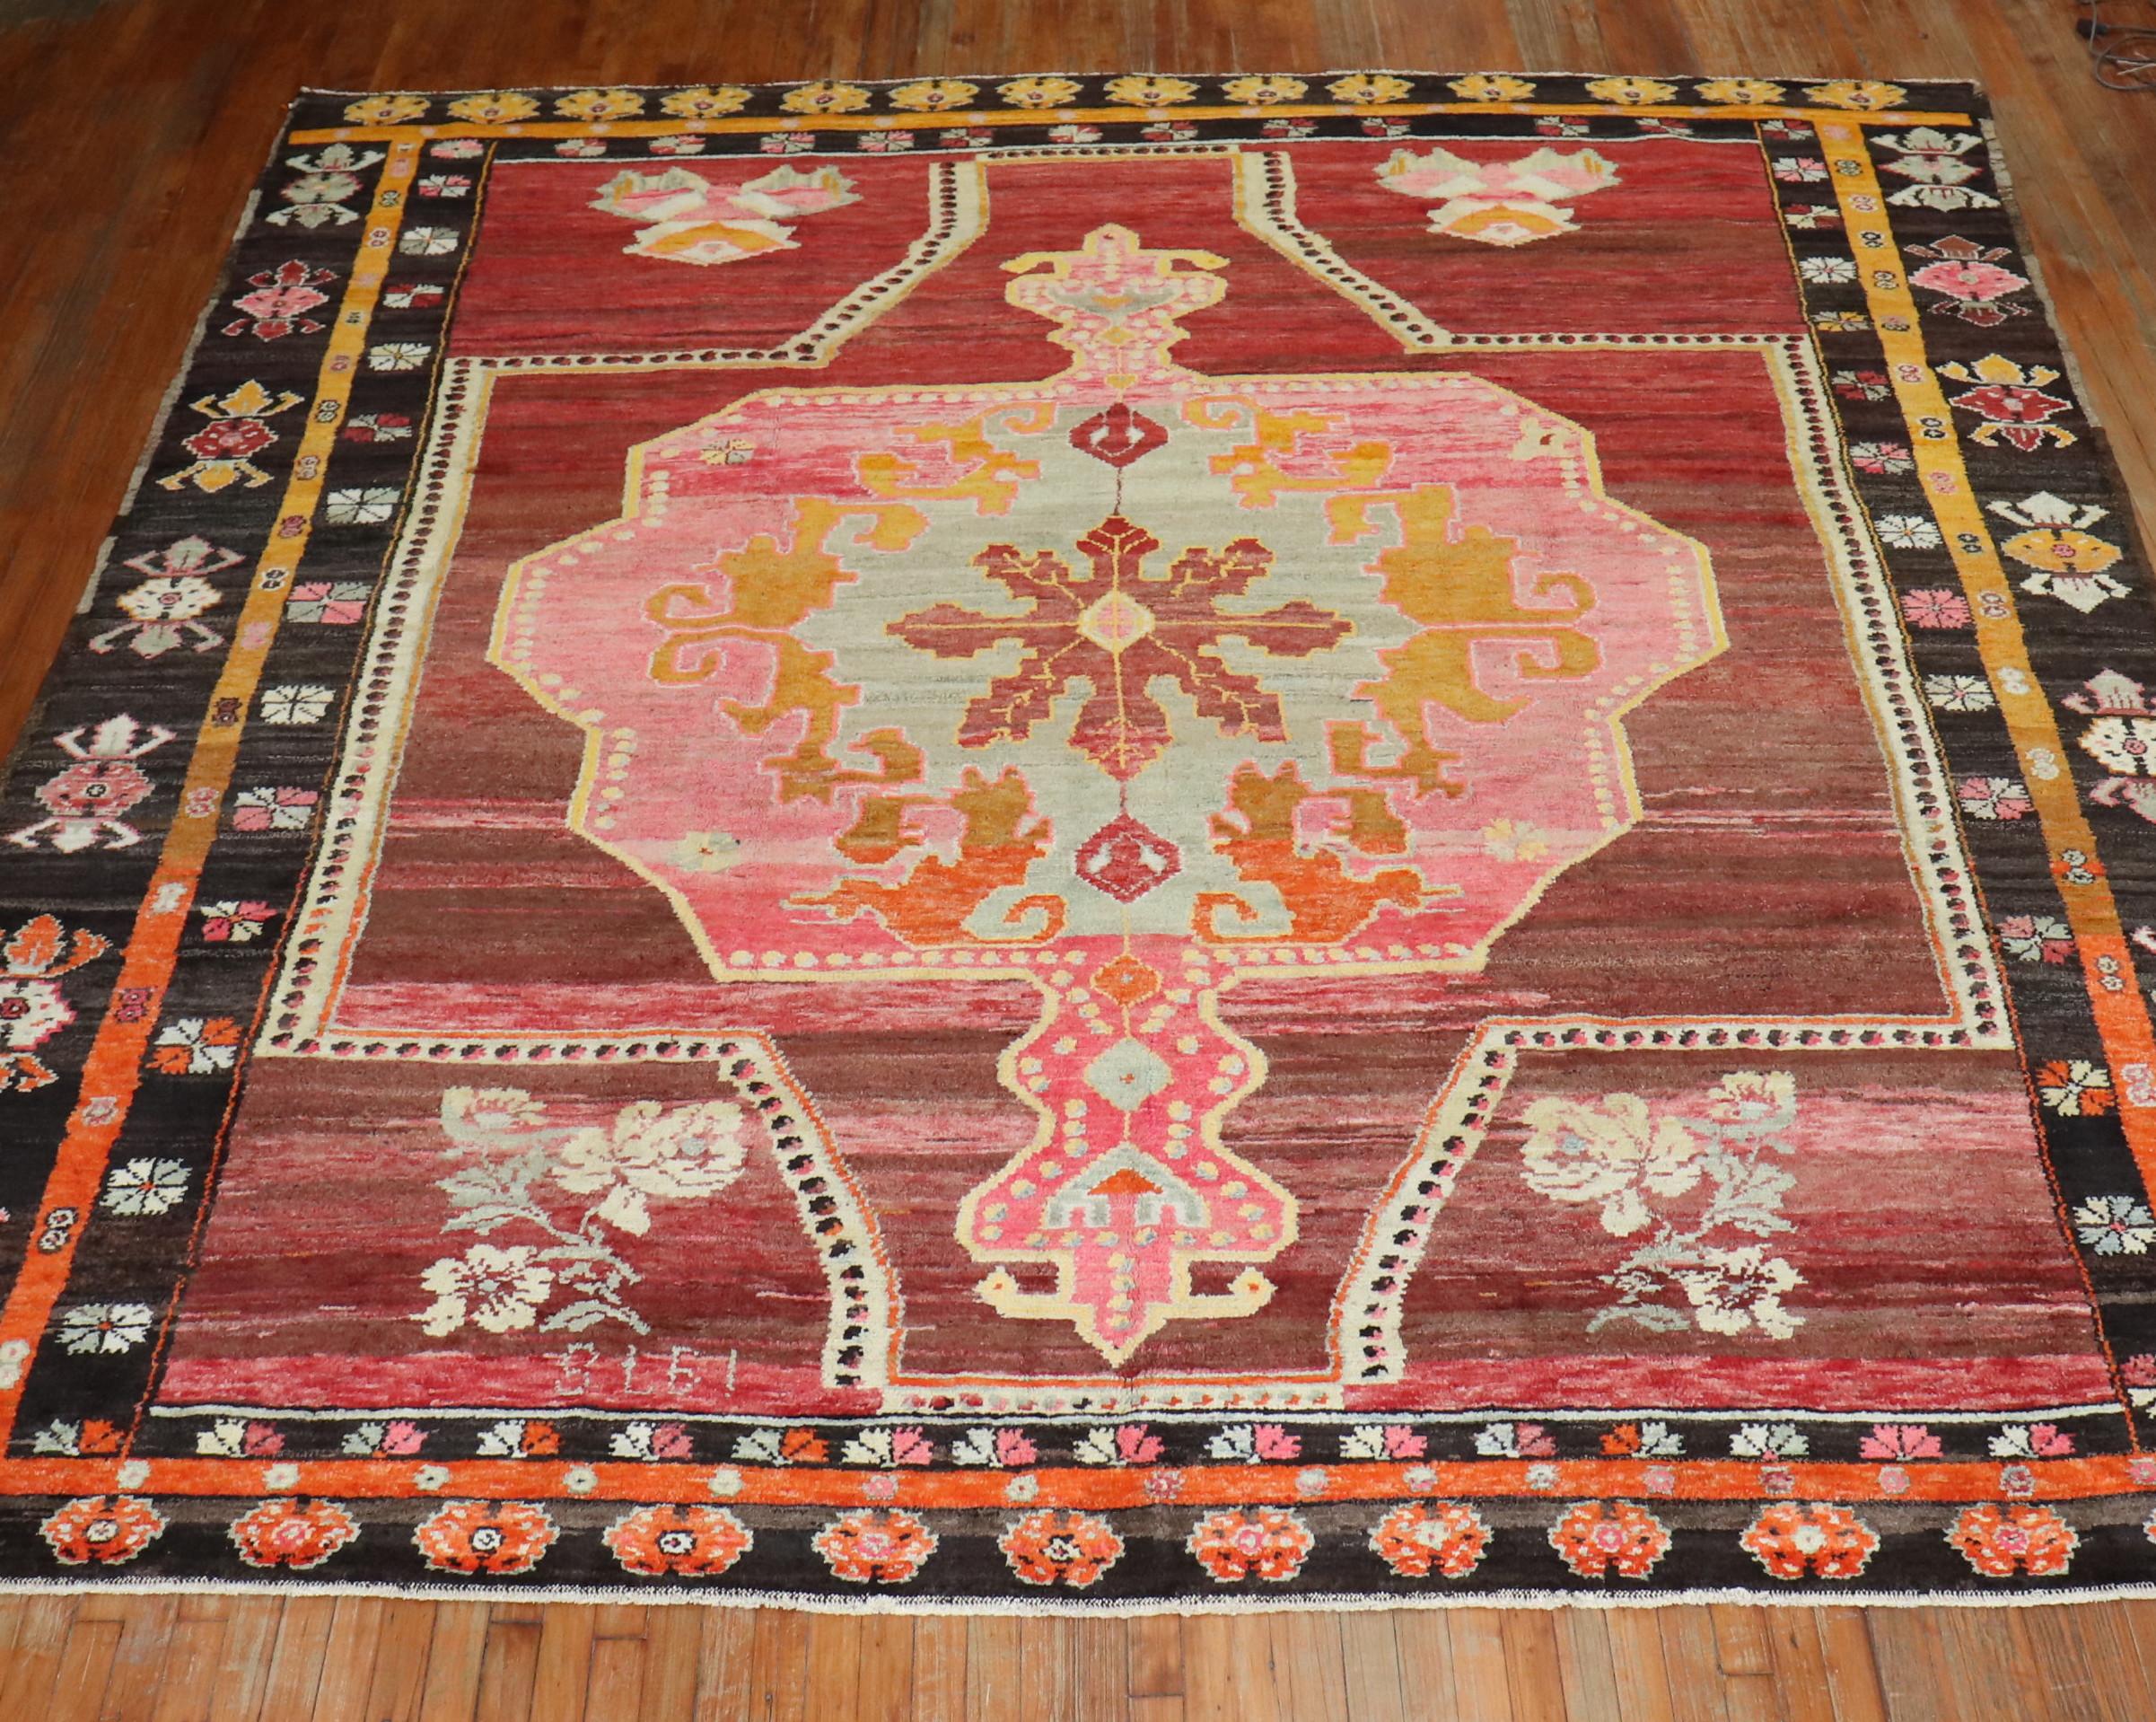 A wild 20th century Turkish Kars square size rug. A large scale floral design featuring a bright pink medallion with a striated brown and soft red field, 4 floral bouquets in the field surrounded by a multi-band border in brown and orange. Border.